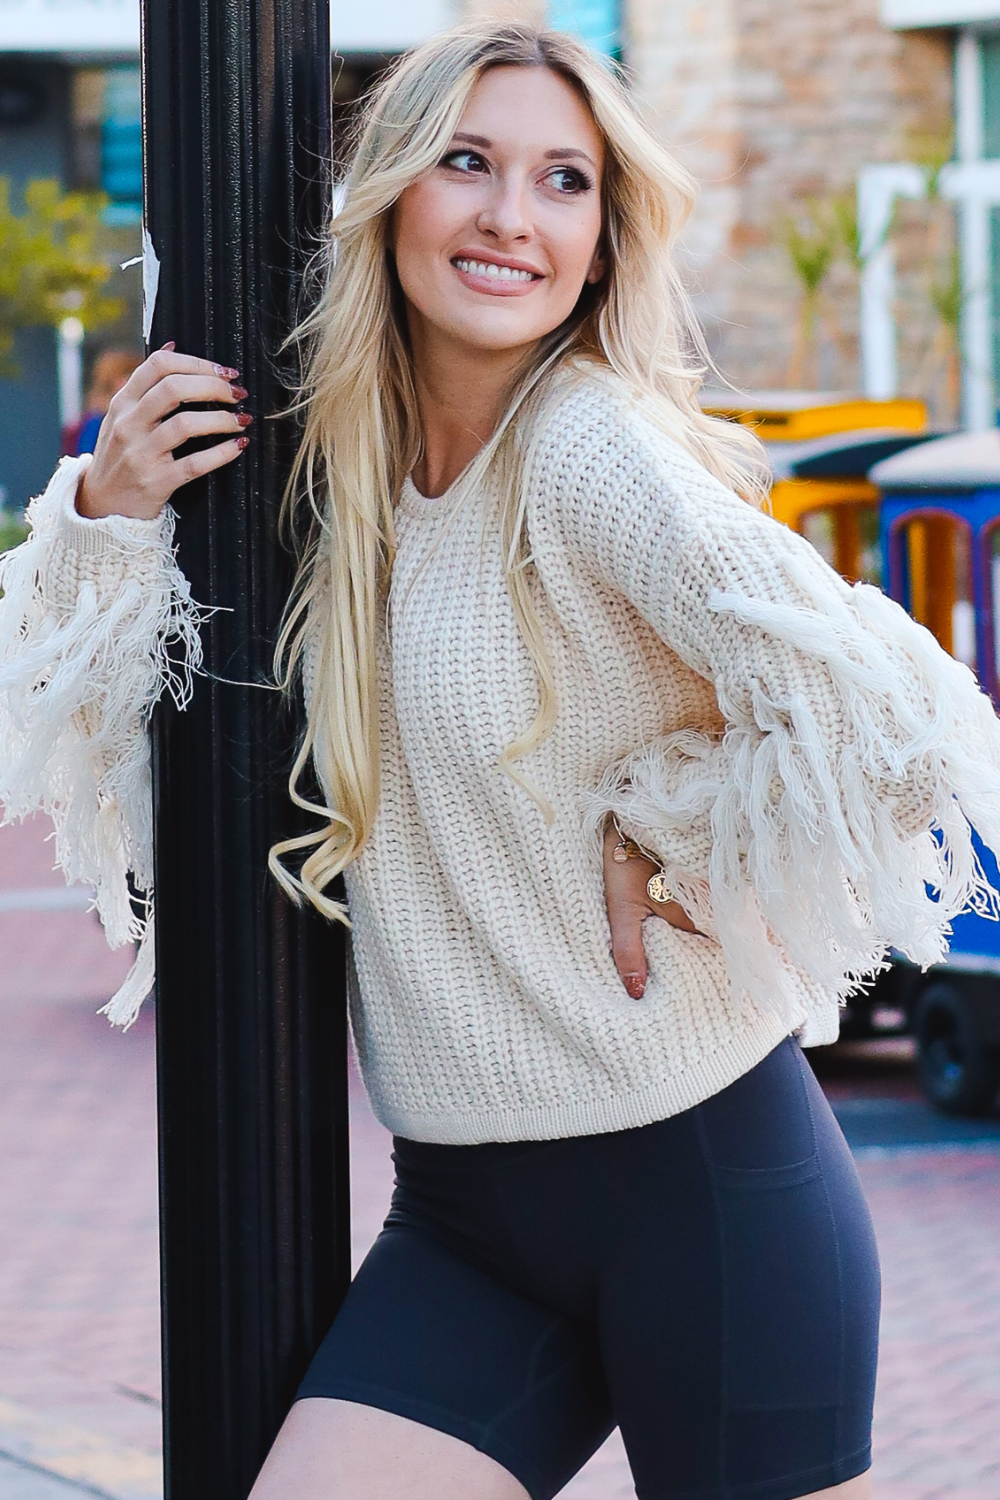 GET FRINGED UP GIRL SWEATER